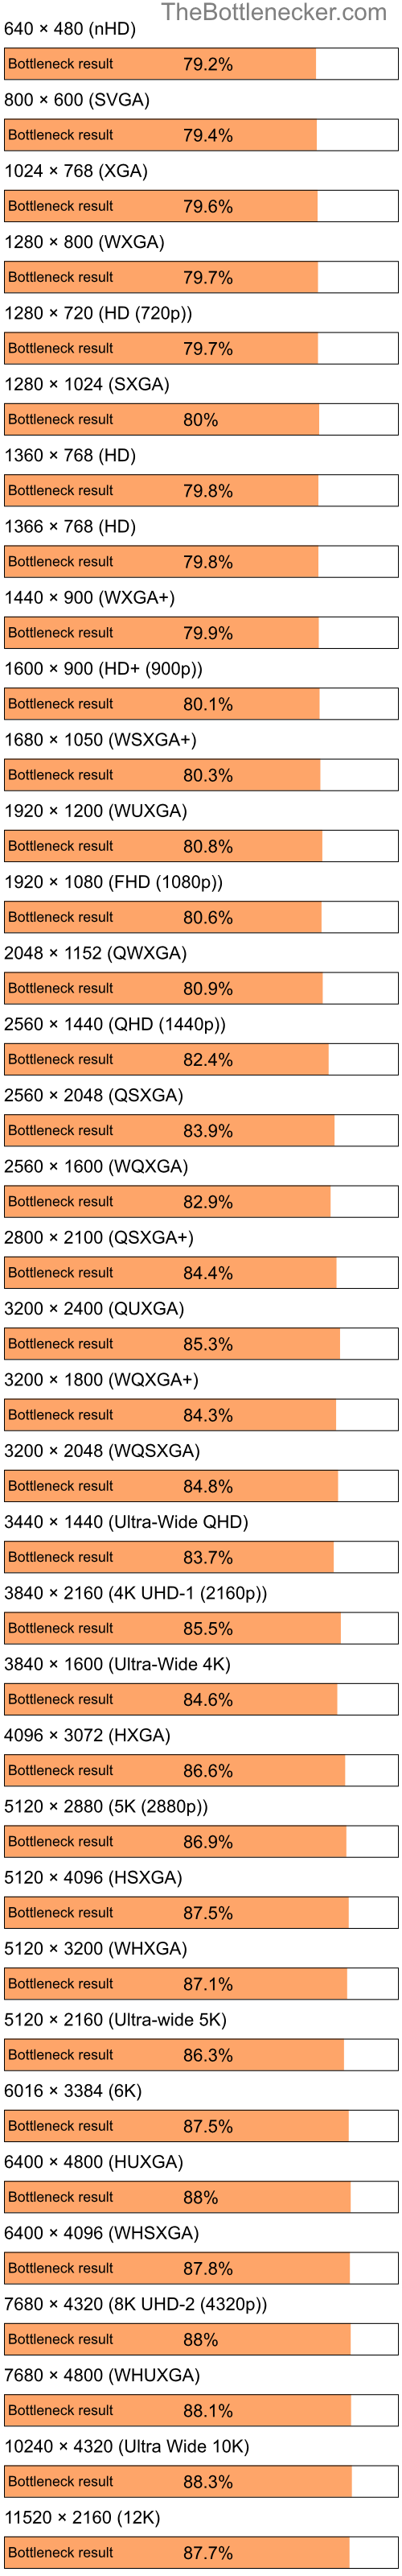 Bottleneck results by resolution for Intel Pentium 4 and NVIDIA nForce 620i in Graphic Card Intense Tasks